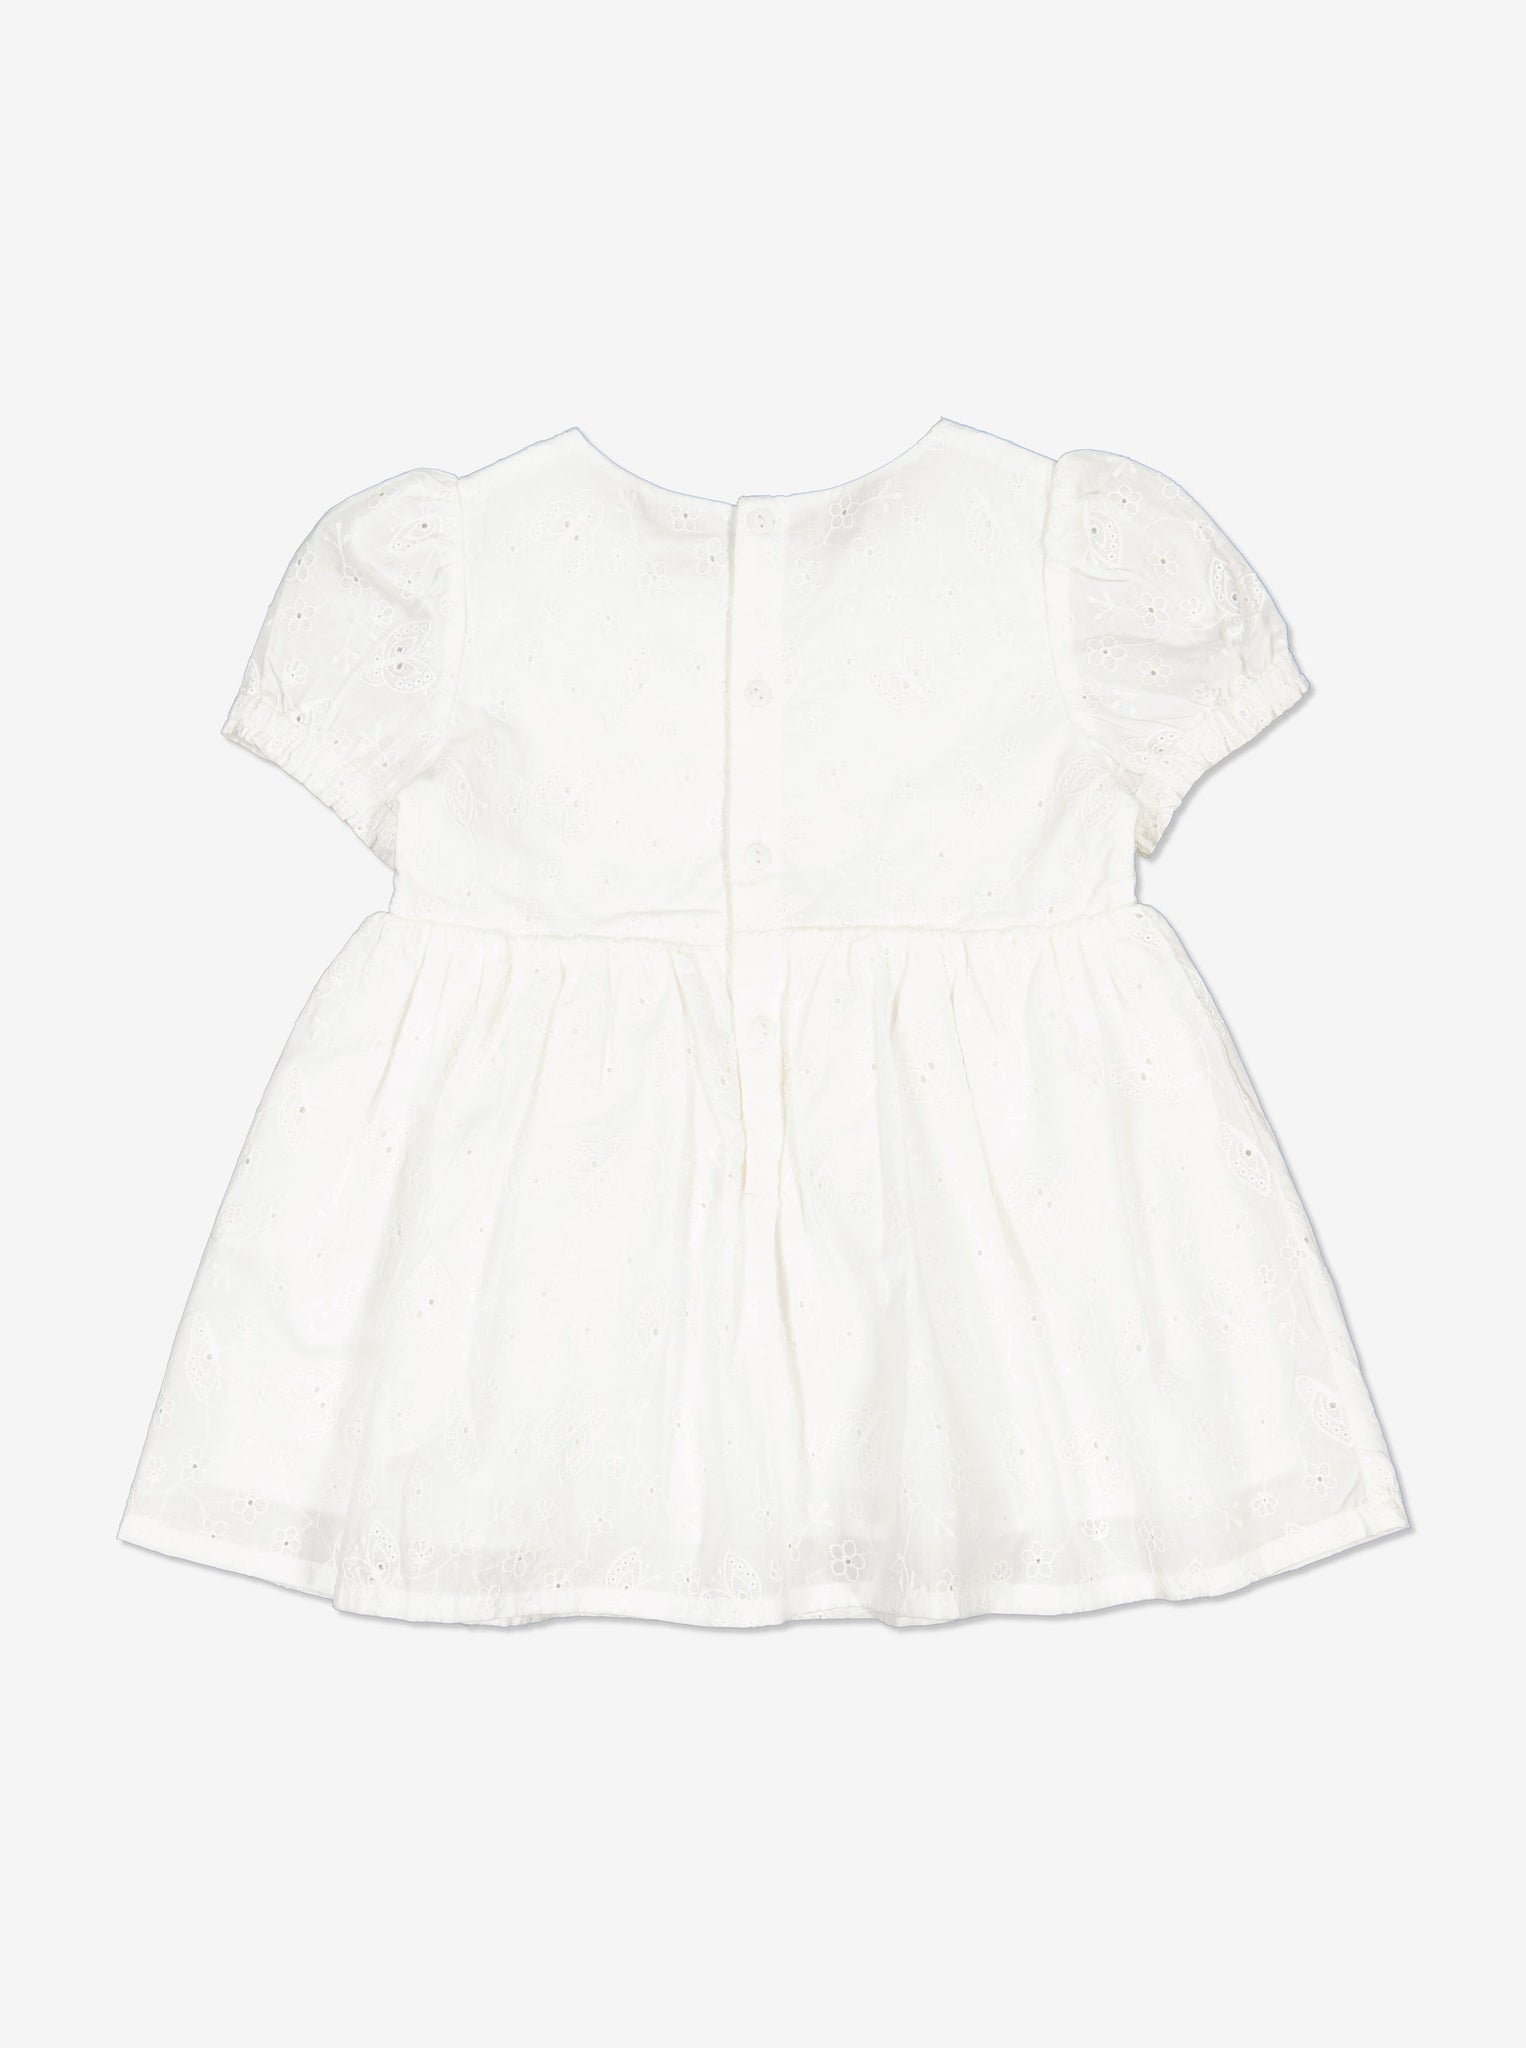 Butterfly Kids Summer Dress In White from Polarn O. Pyret Kidswear. Made from 100% GOTS Organic Cotton.